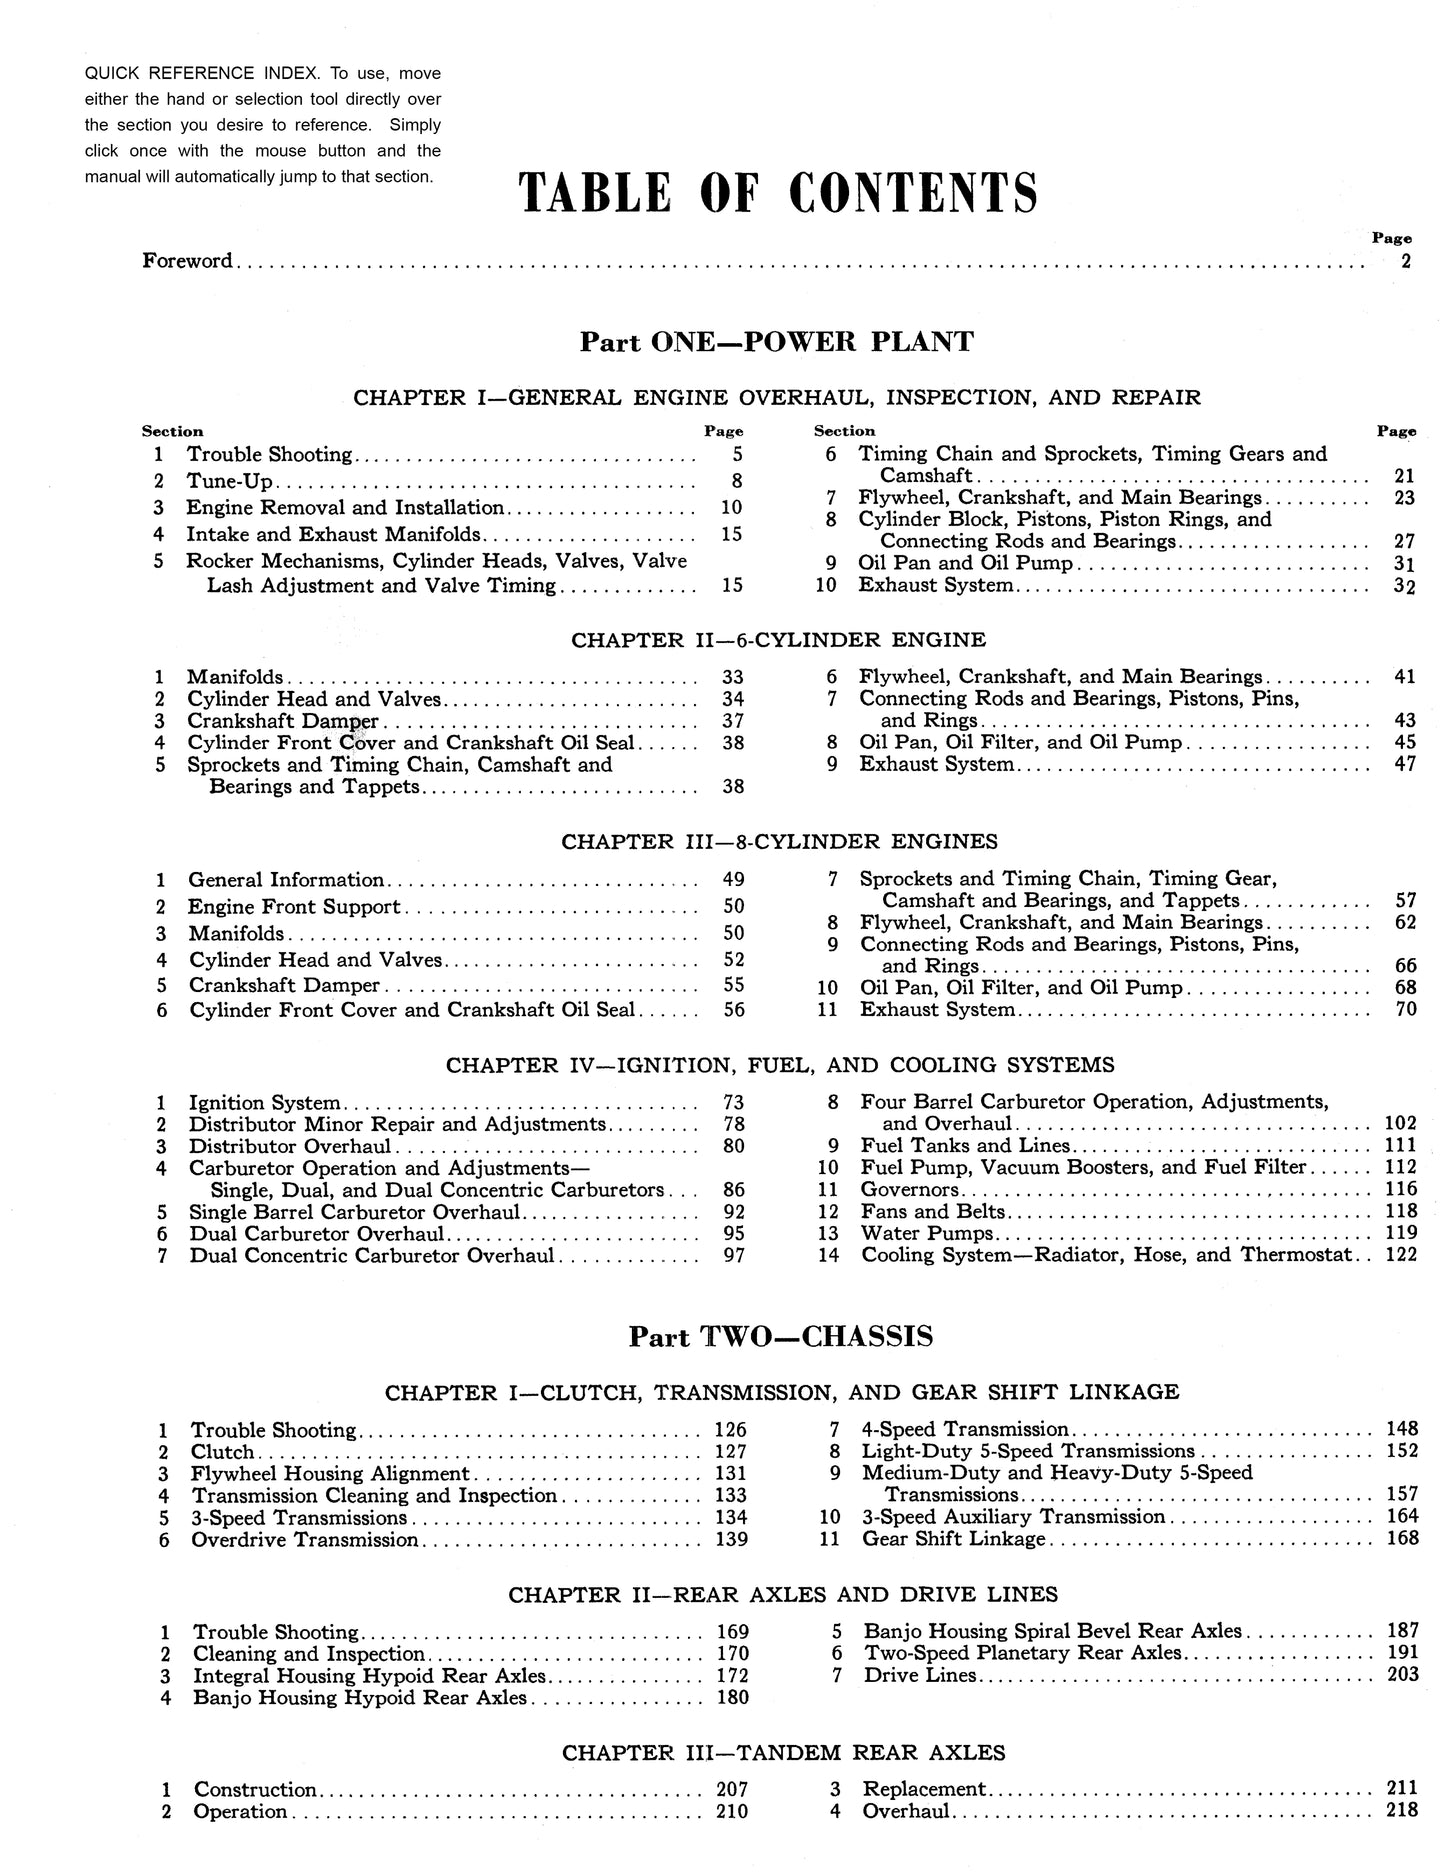 1956 Ford Truck Shop Manual